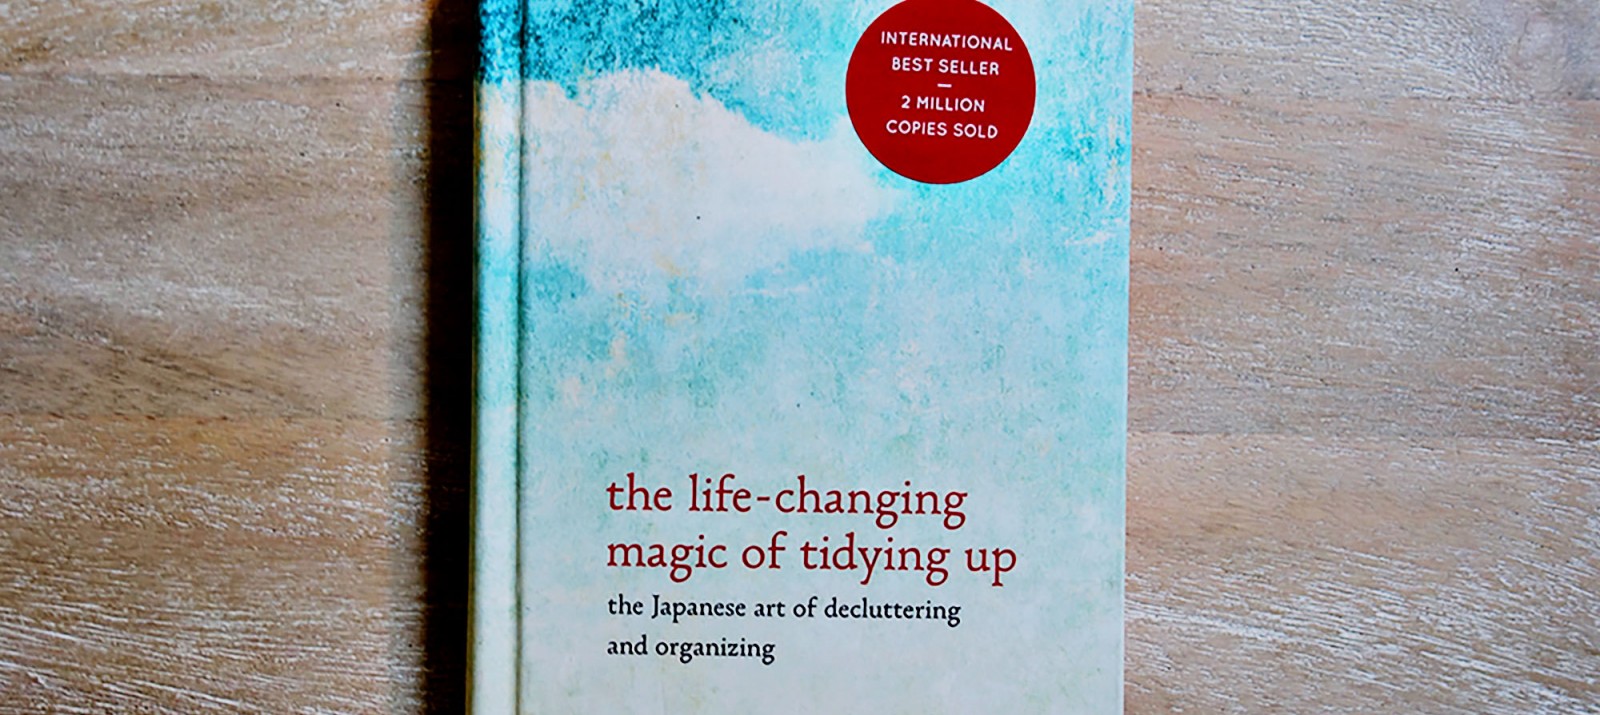 Marie Kondo The Life-Changing Magic of Tidying Up book on a wooden surface.